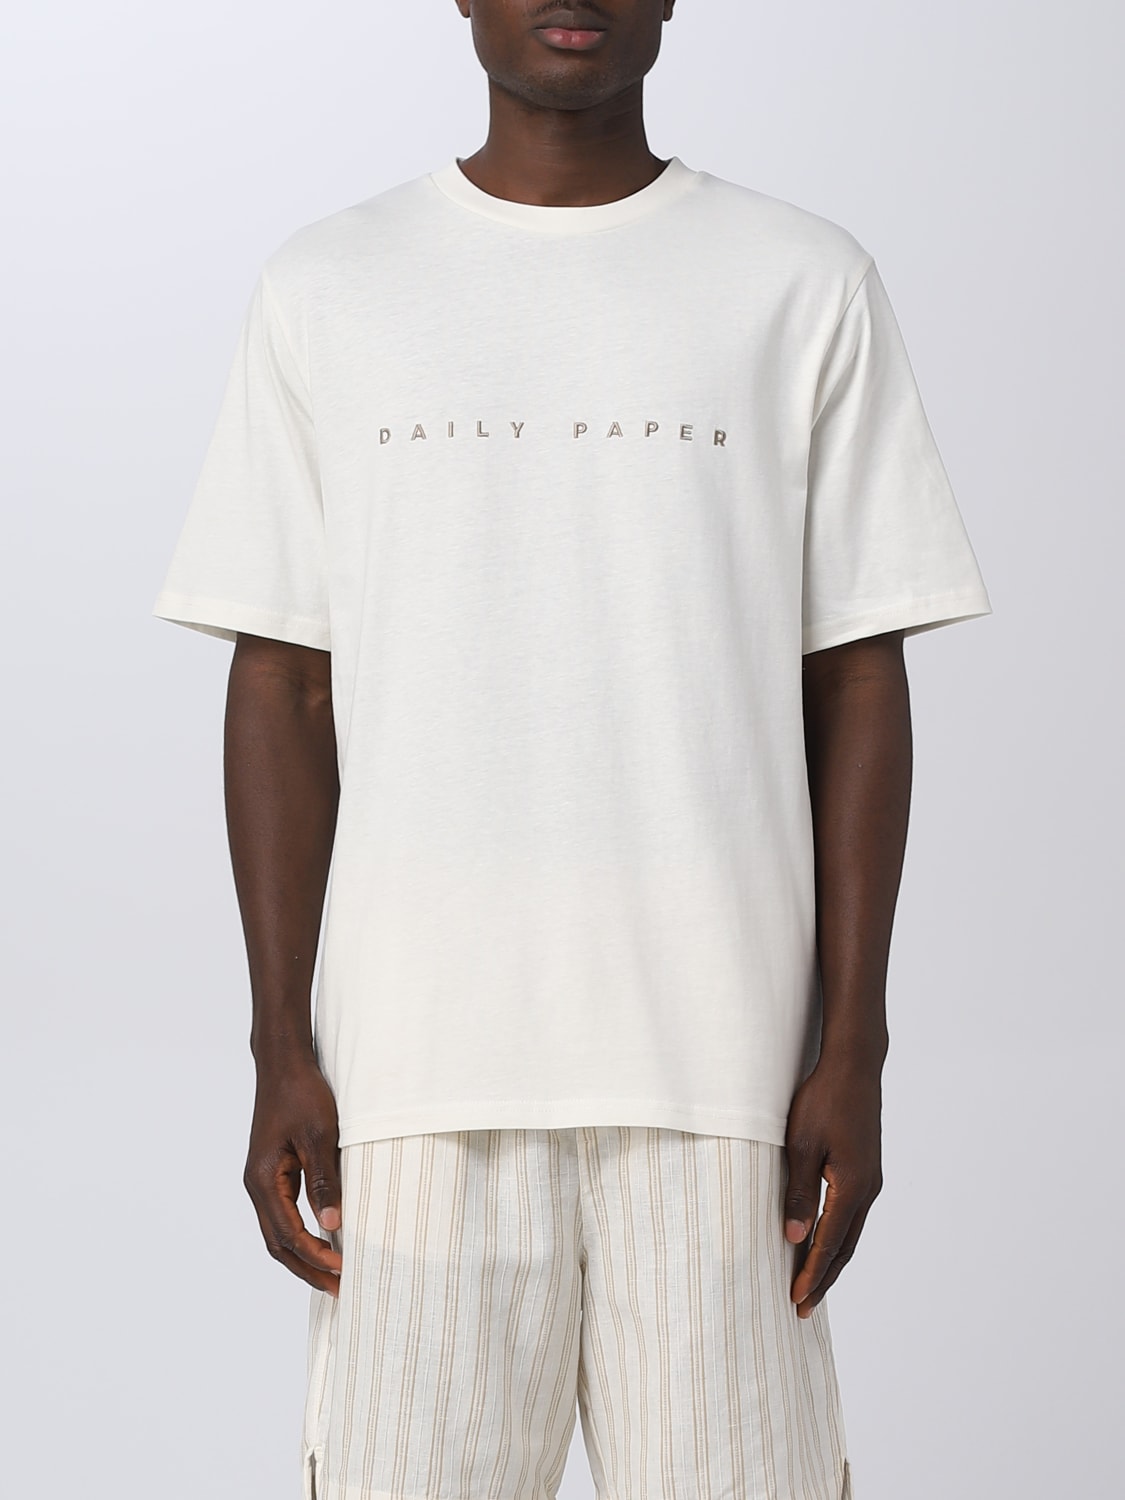 DAILY PAPER: t-shirt for man - White | Daily Paper t-shirt 2312023 online on